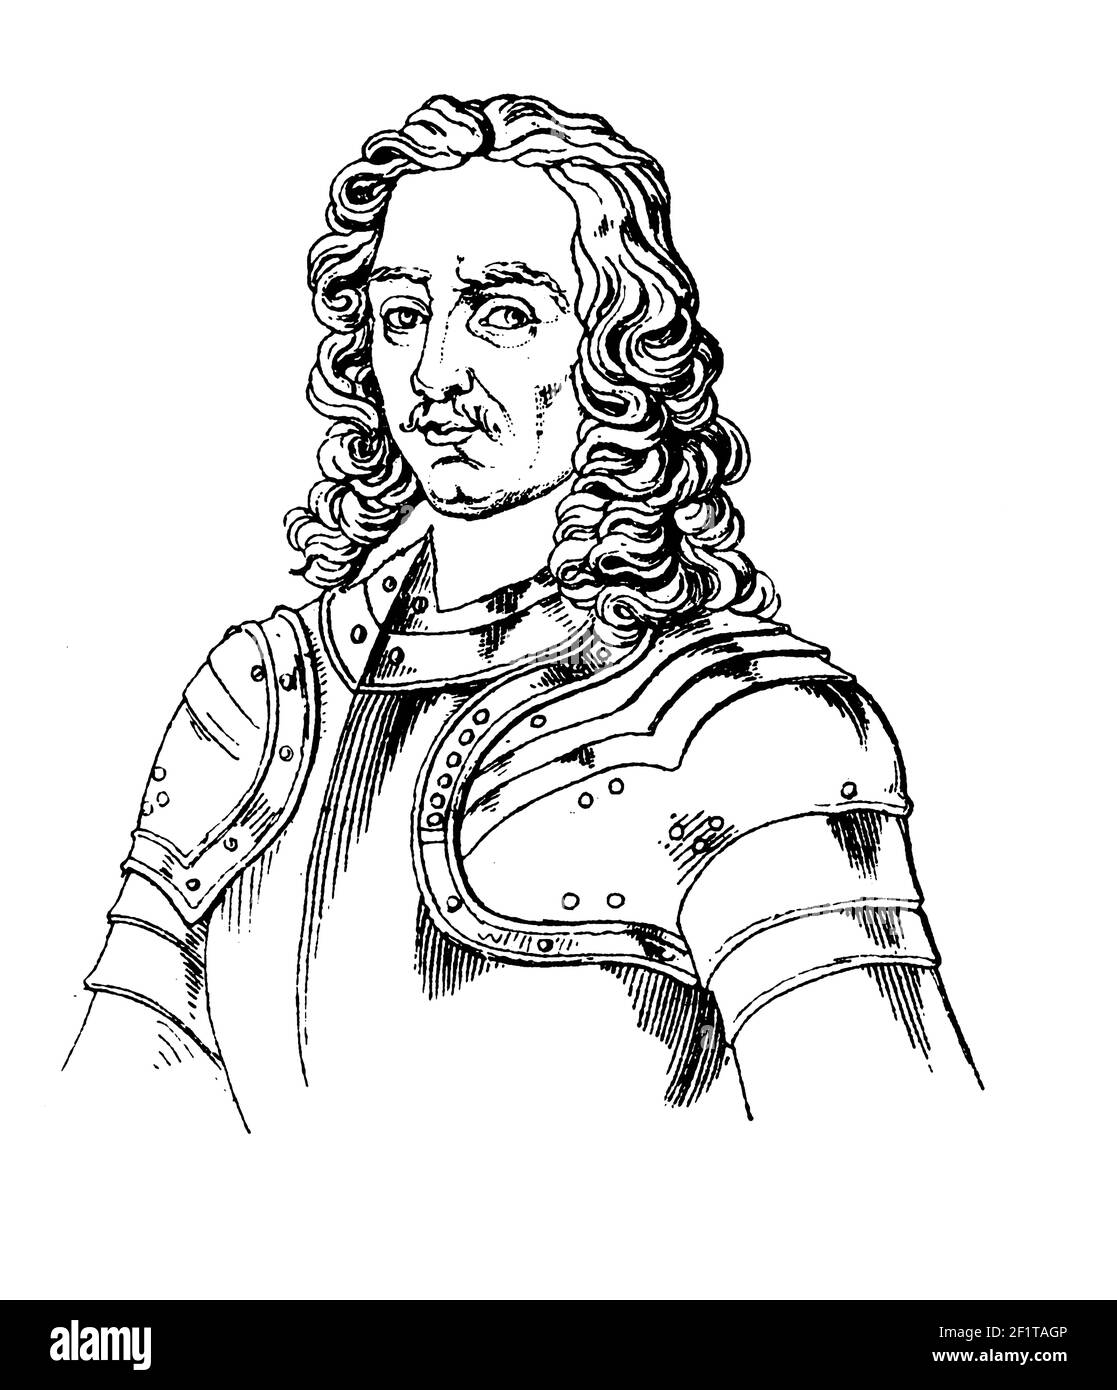 Antique illustration of a portrait of John Hampden, English politician. He was born in 1595 and died on June 24, 1643 in England. Engraving published Stock Photo